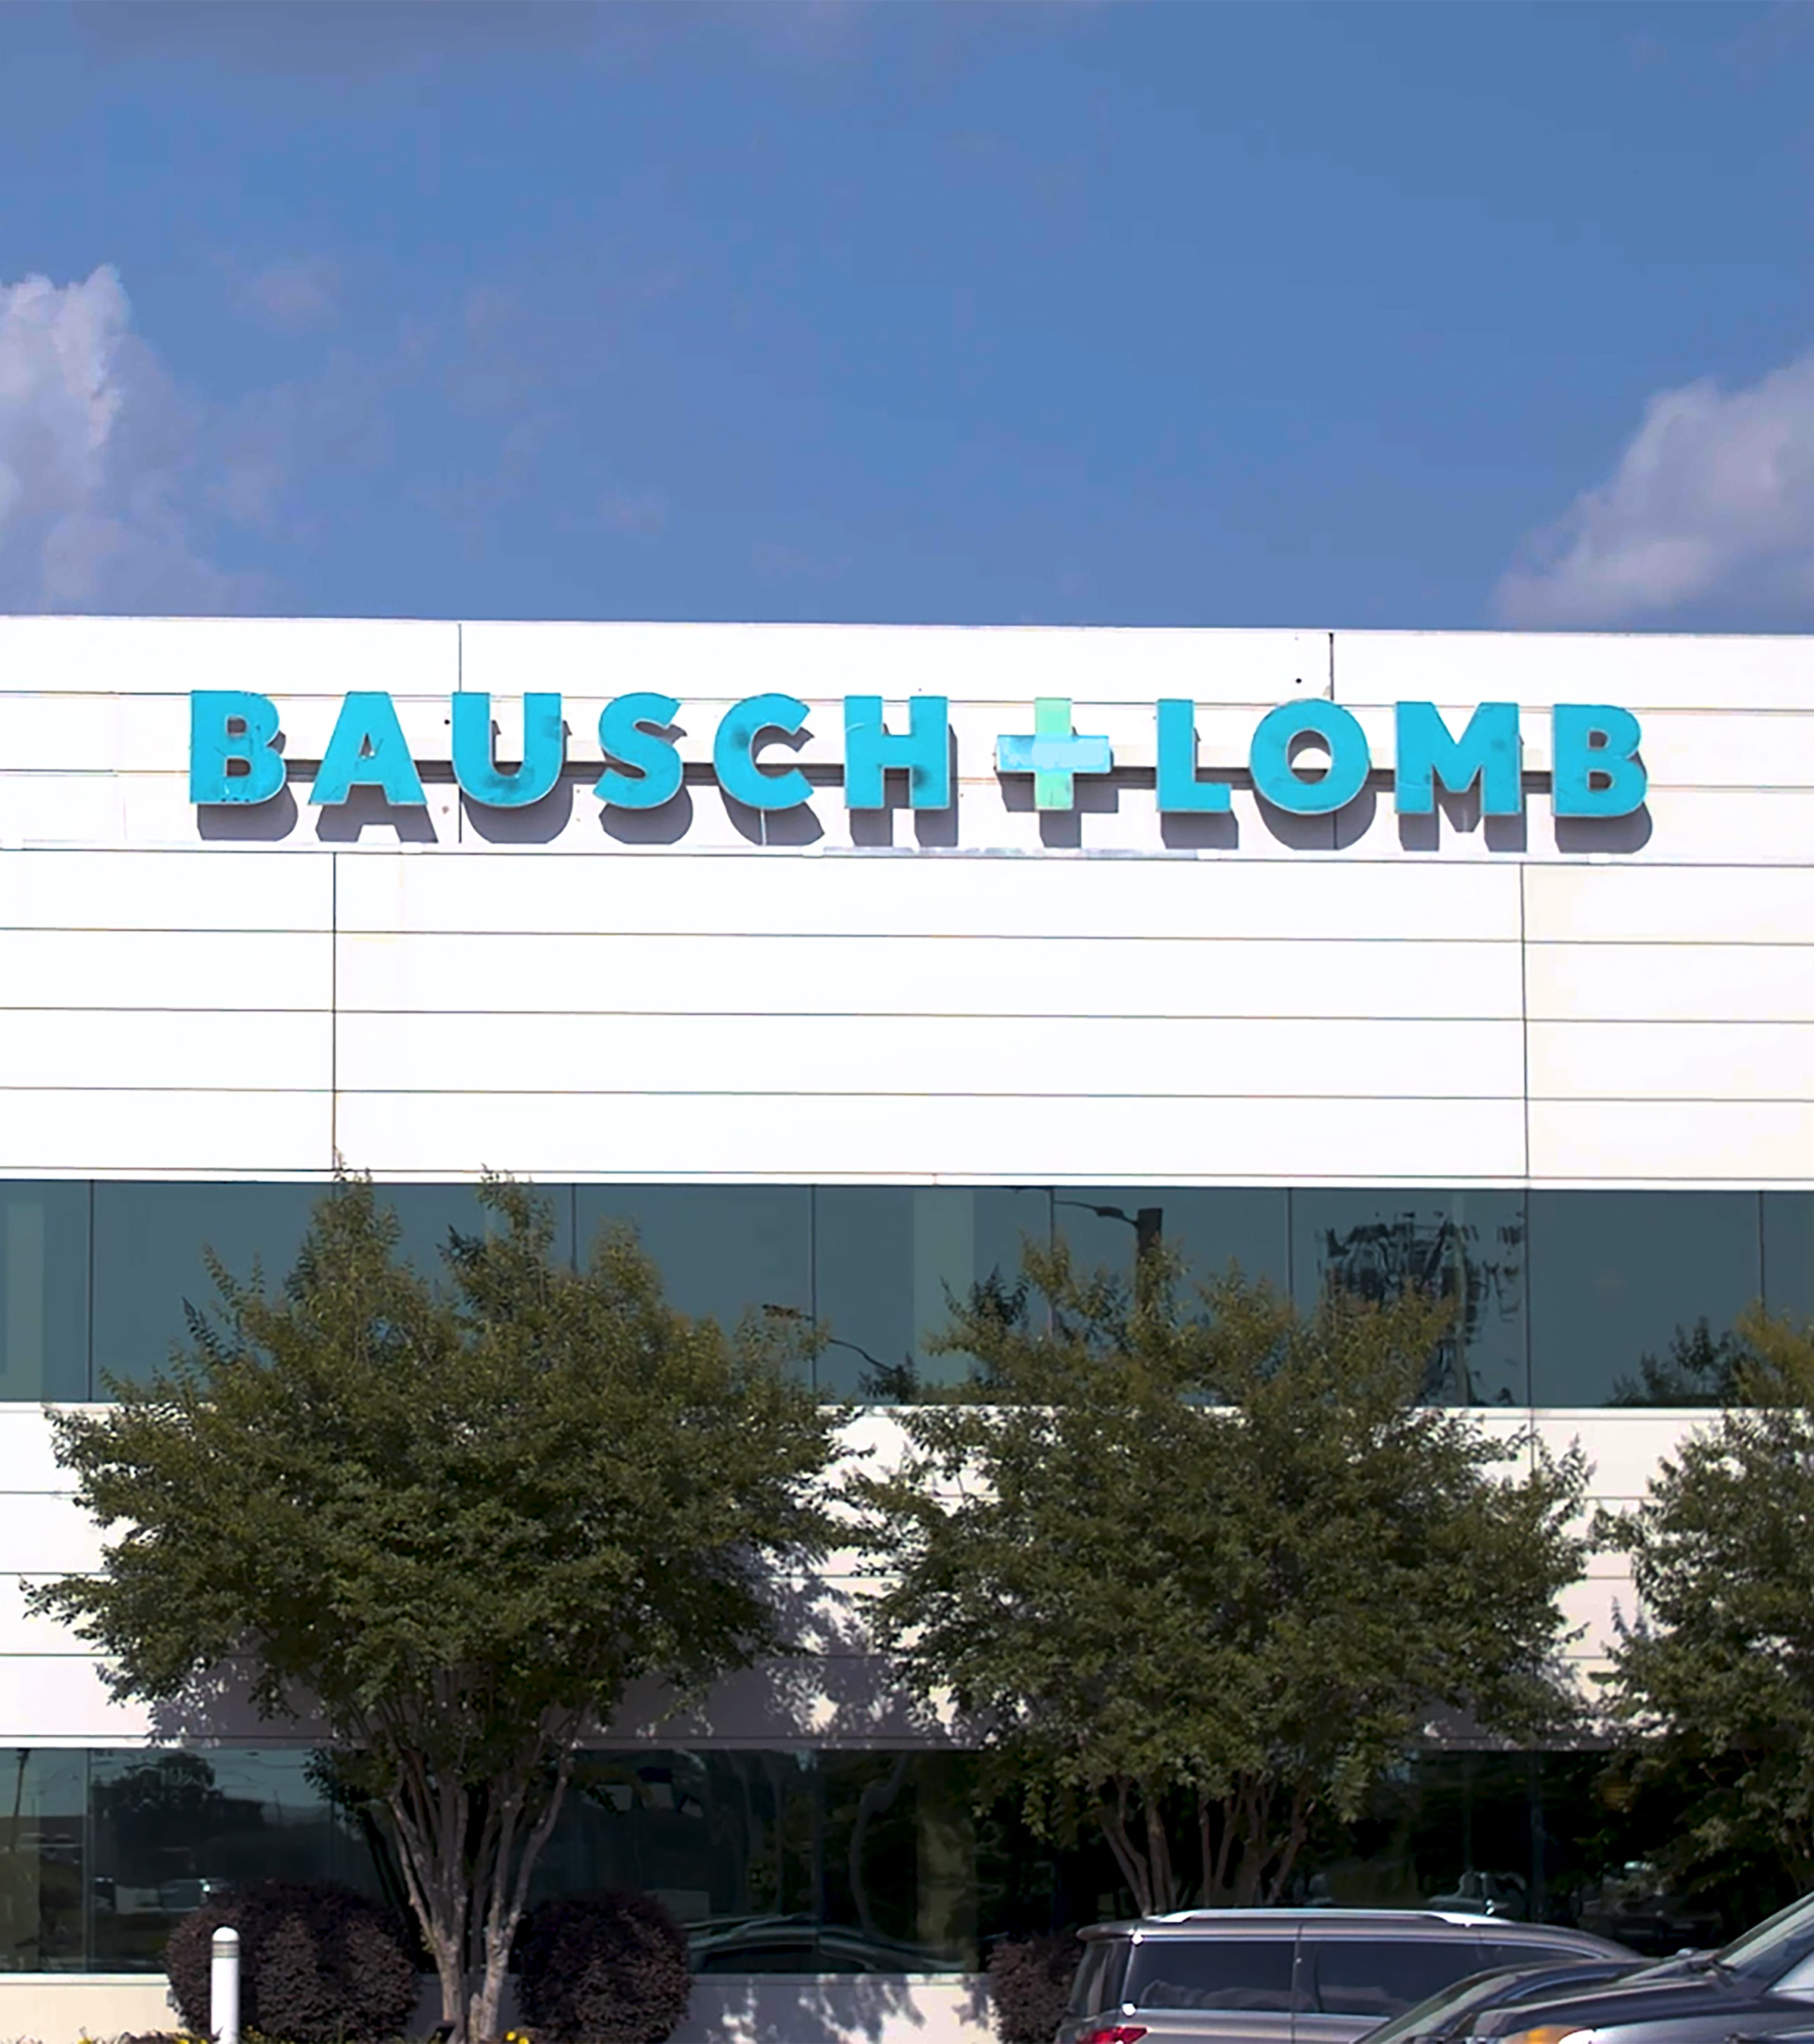 Video footage highlights several Bausch + Lomb products being manufactured at the company’s manufacturing facilities.